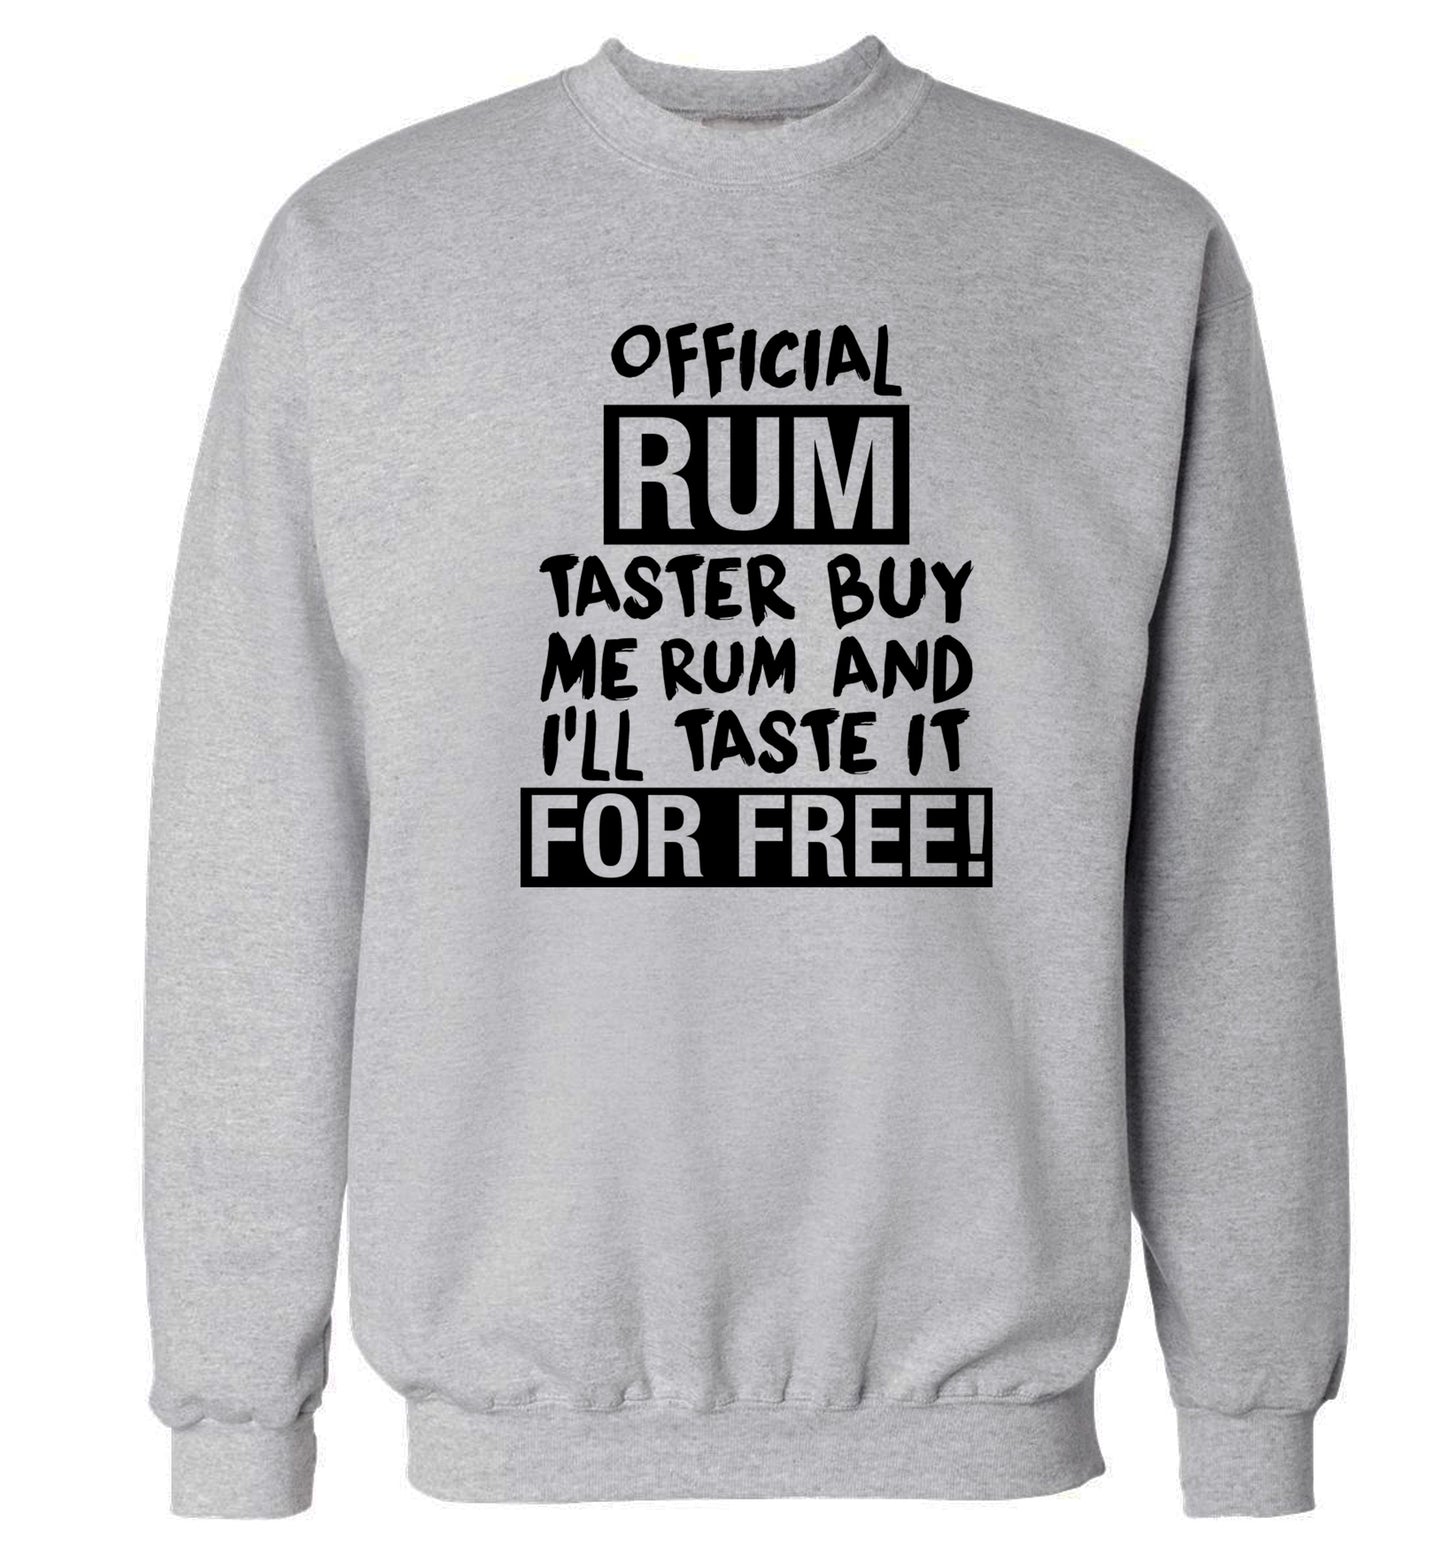 Official rum taster buy me rum and I'll taste it for free Adult's unisex grey Sweater 2XL